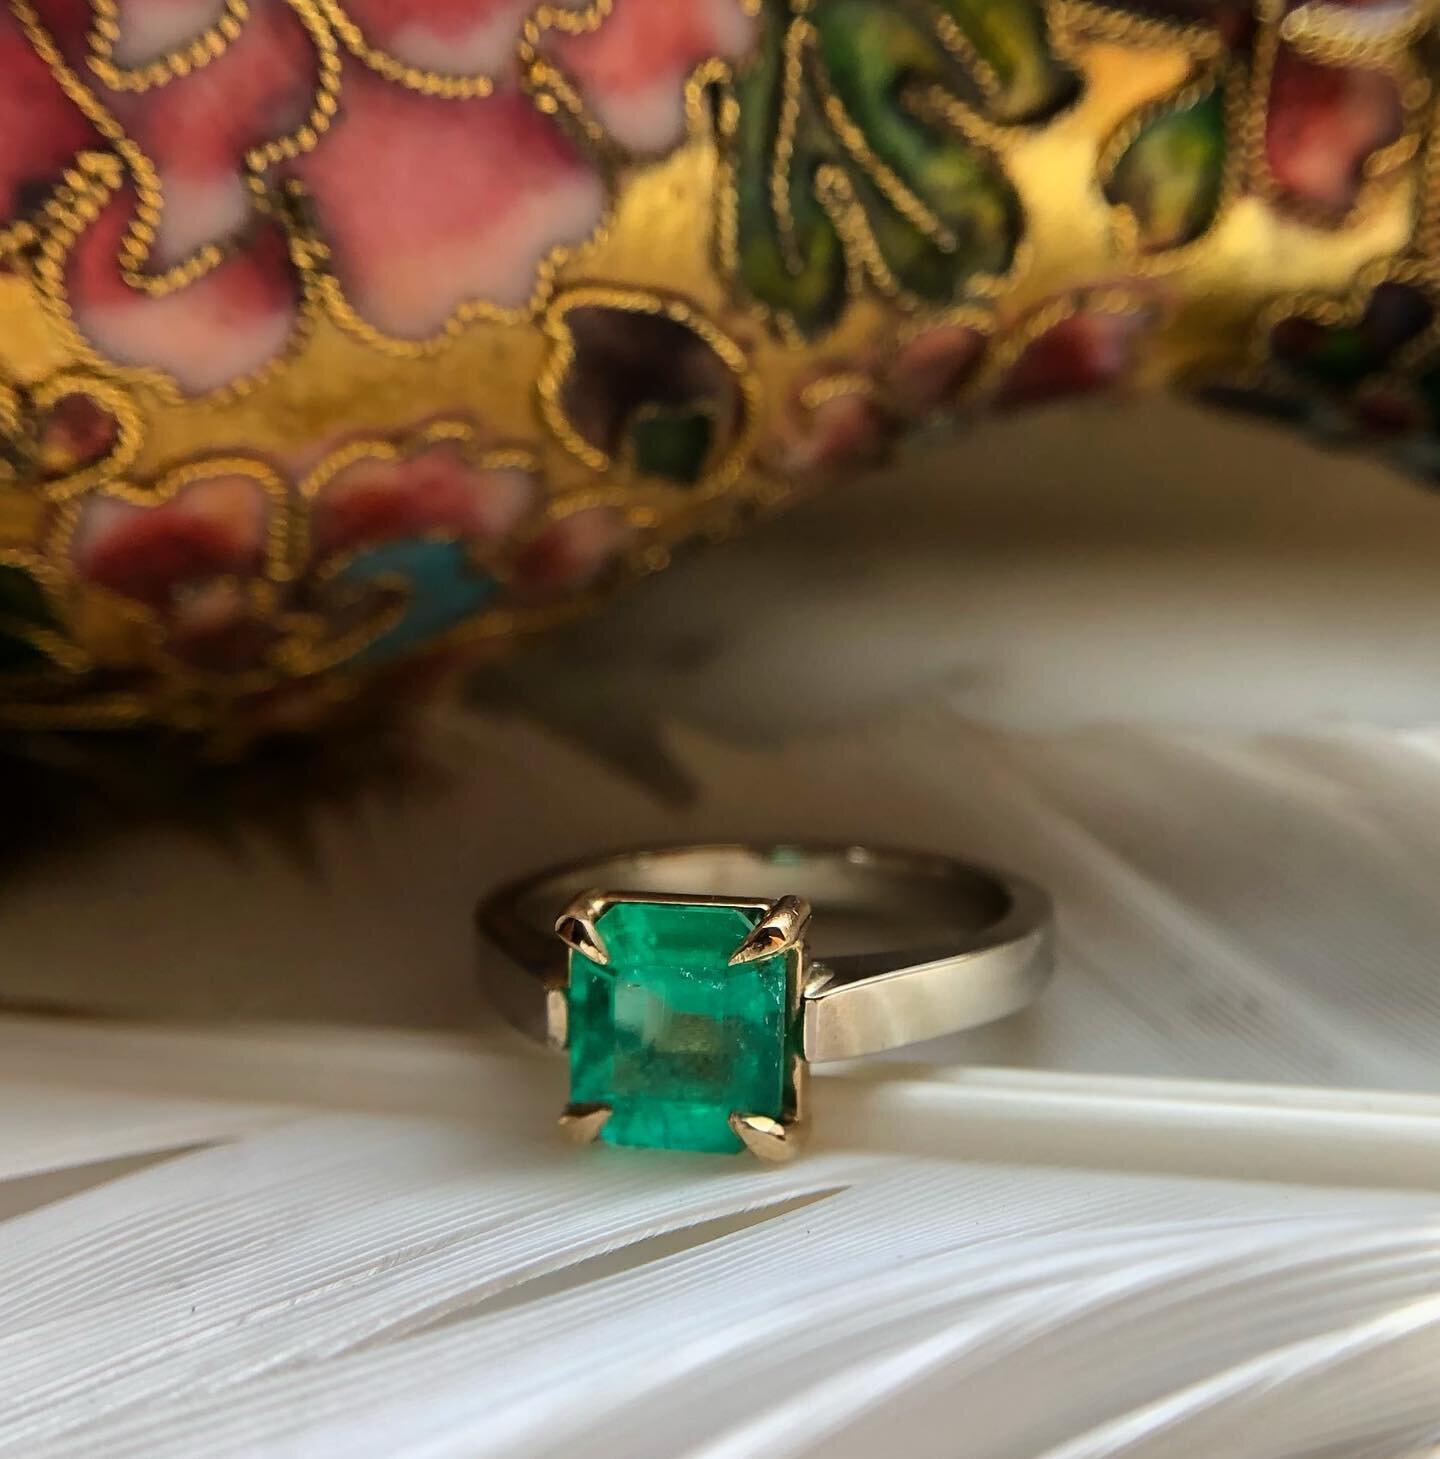 This months birthstone is 😍💚😍
We love emerald so much, even though it&rsquo;s impossible to capture this gems true beauty on camera. 
This ring was custom made in a mix of 14k white and yellow gold and is not for sale. Send us a message to inquire